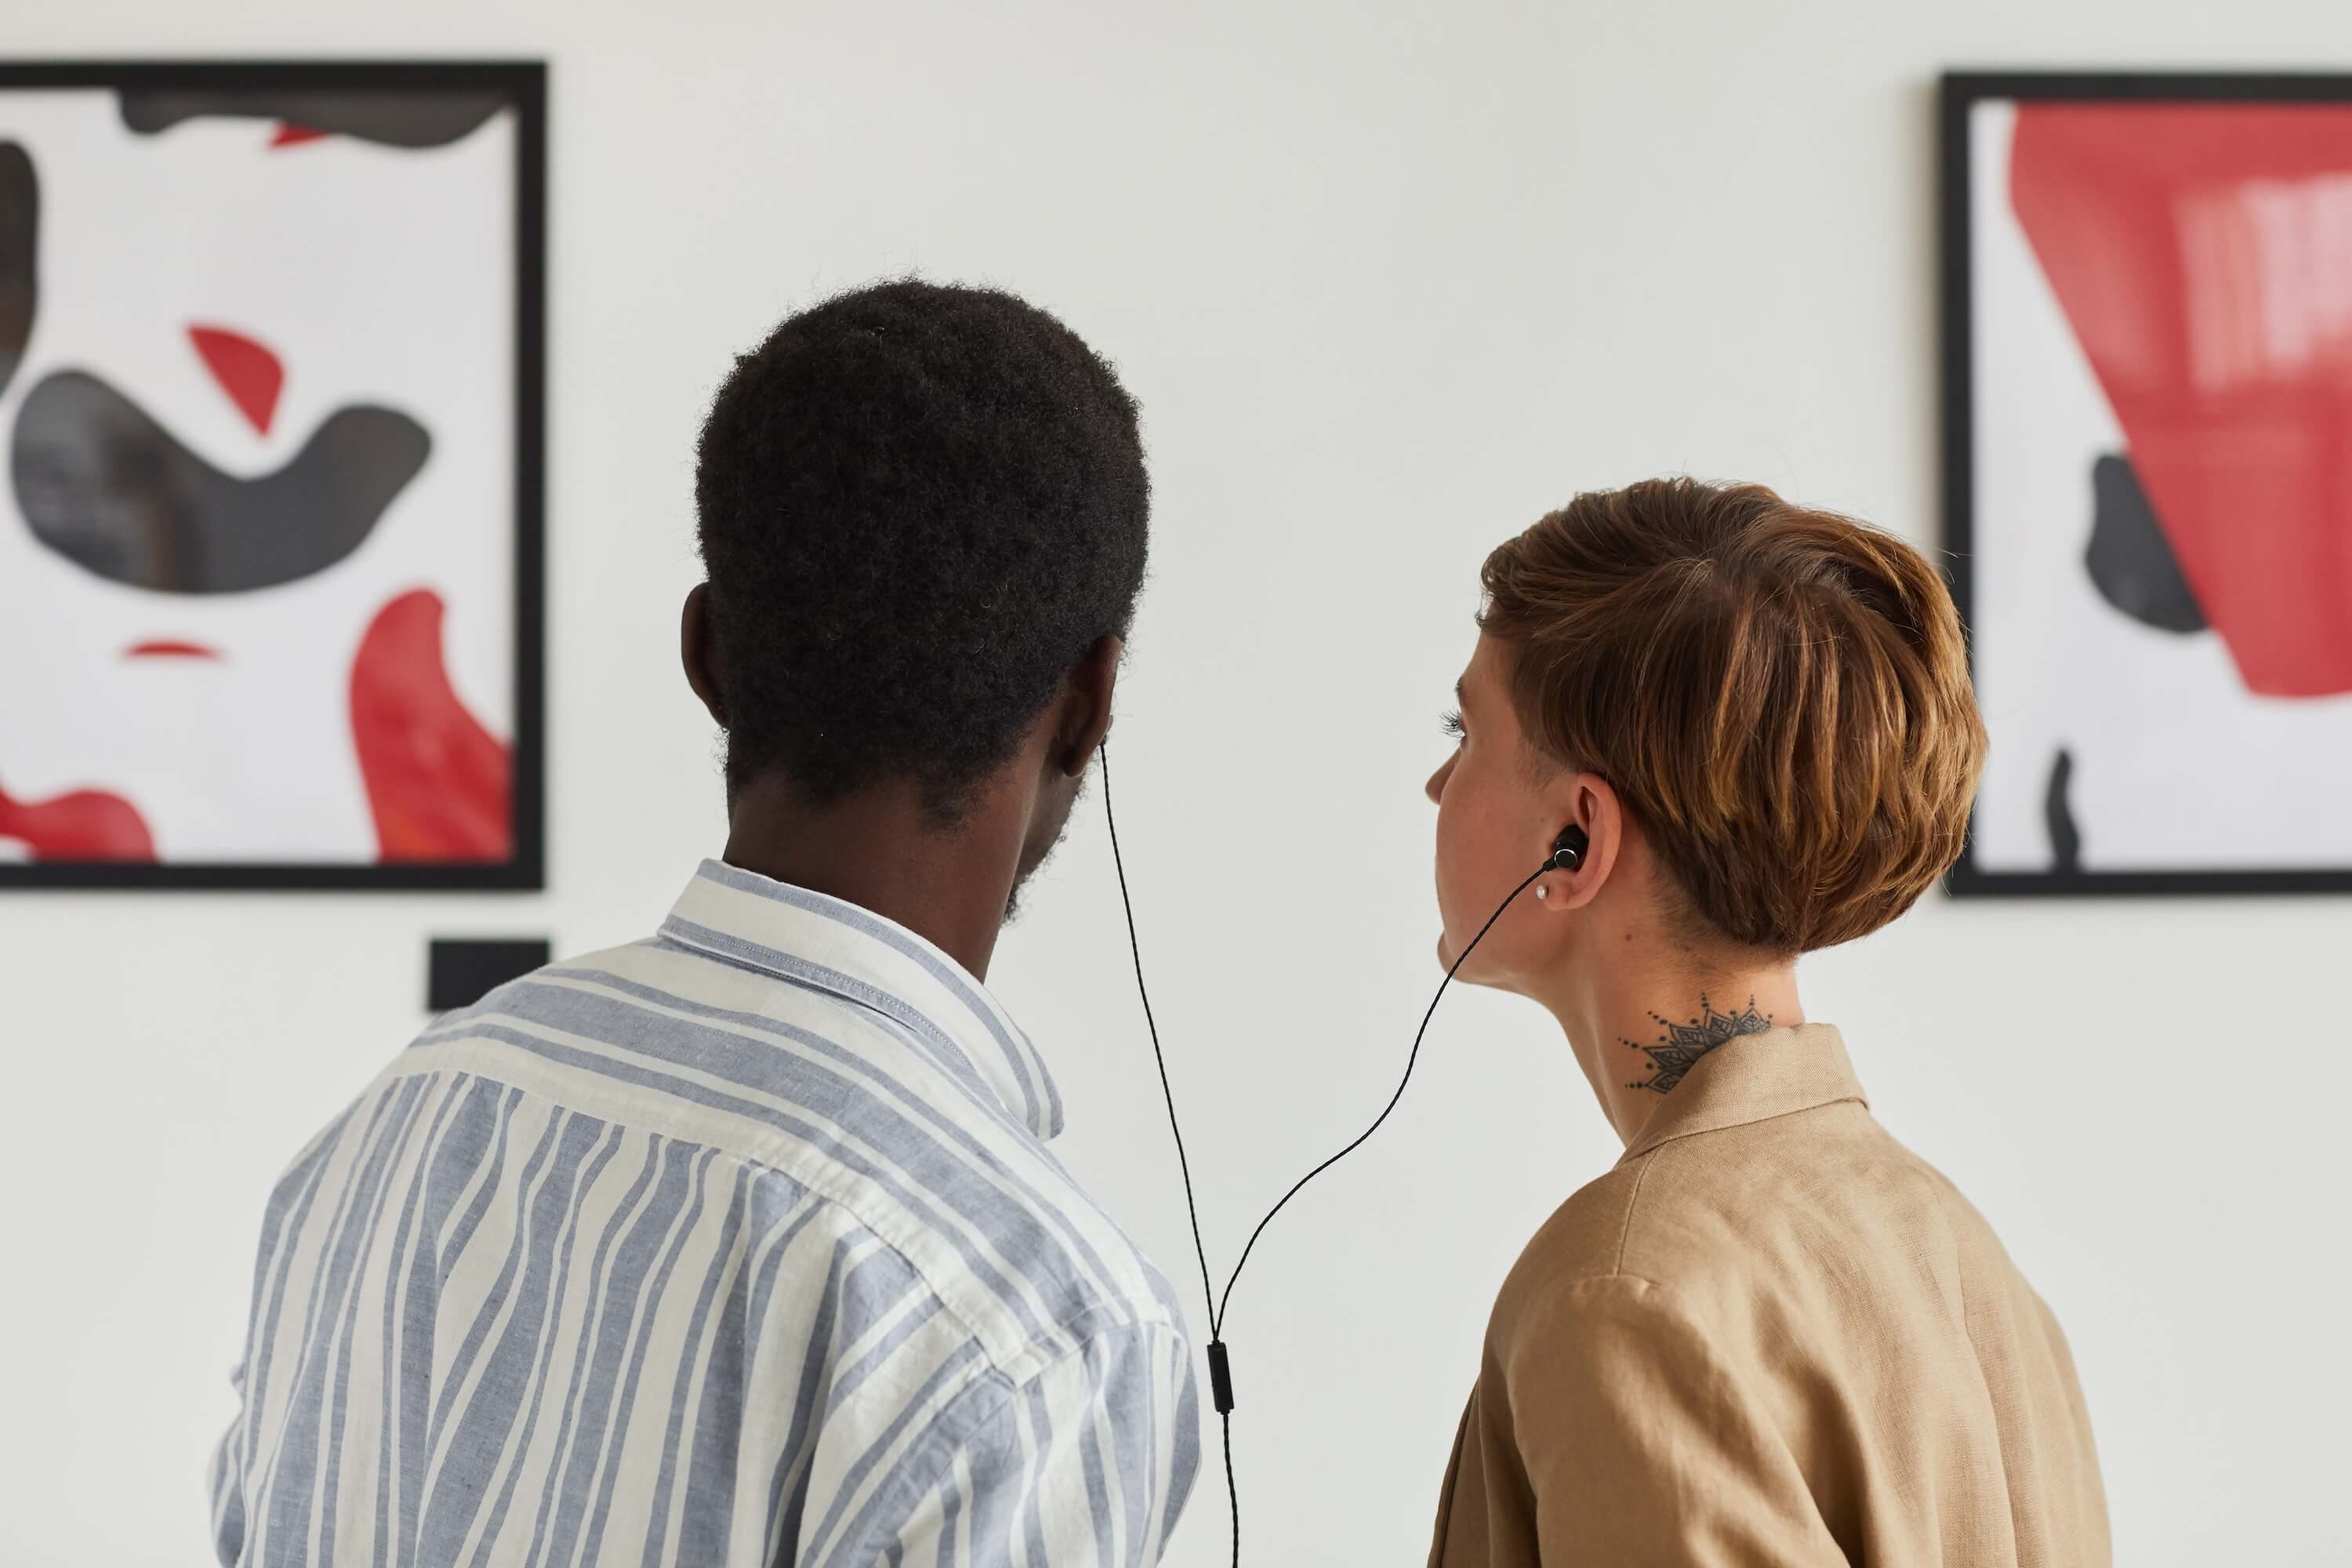 two people sharing an audio tour in an art gallery